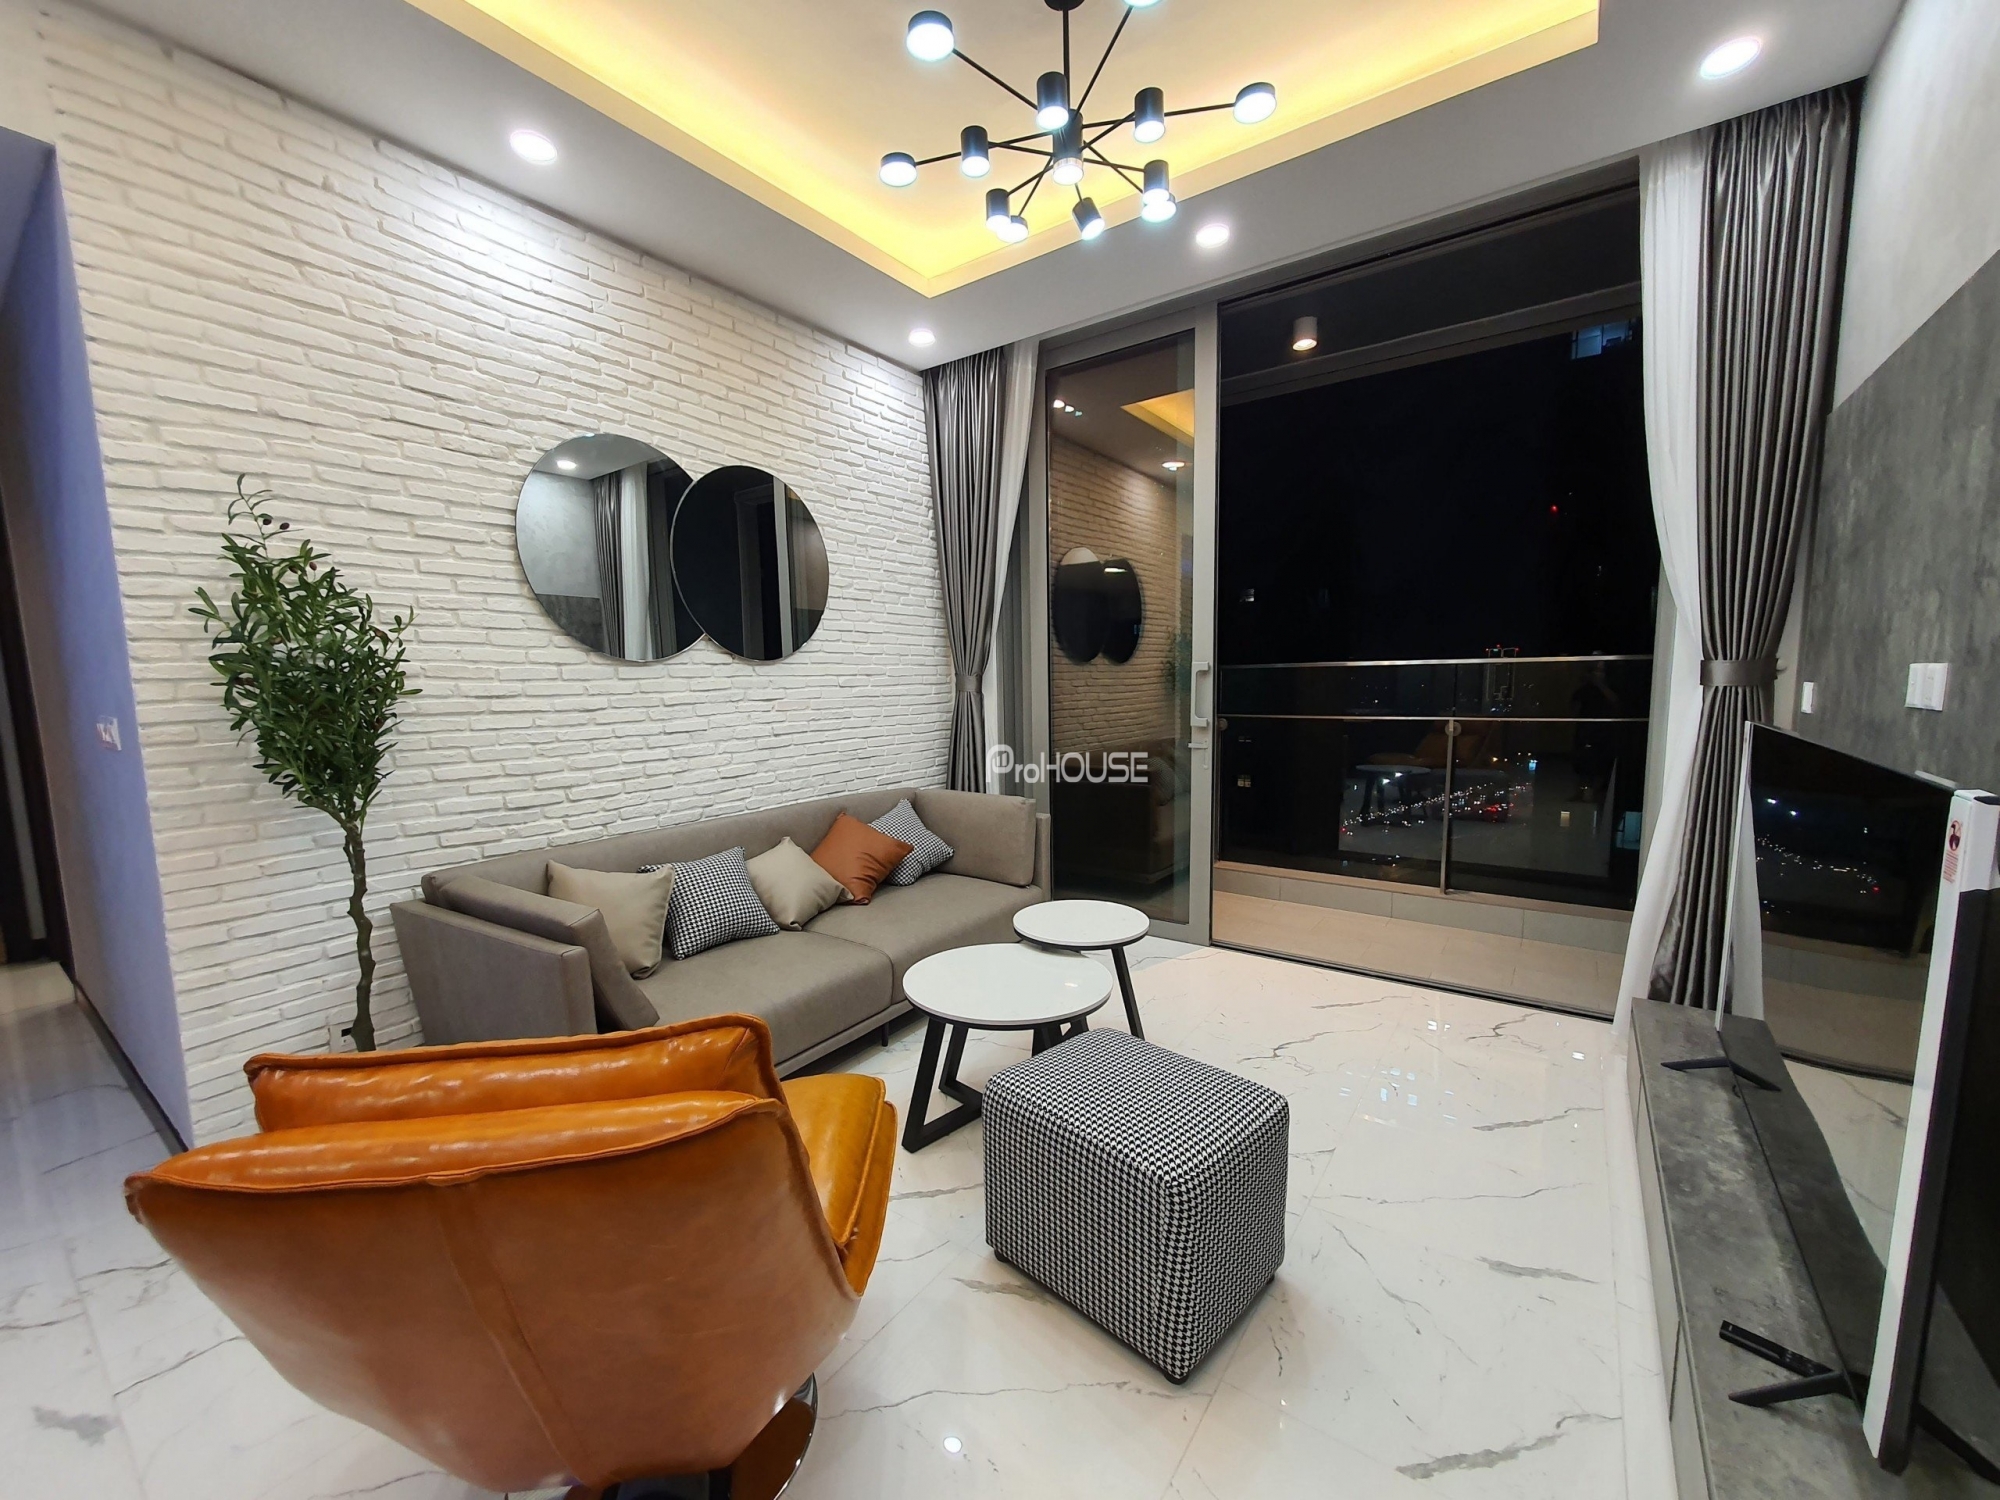 2 bedrooms Empire City apartment for rent with beautiful and high-class furniture